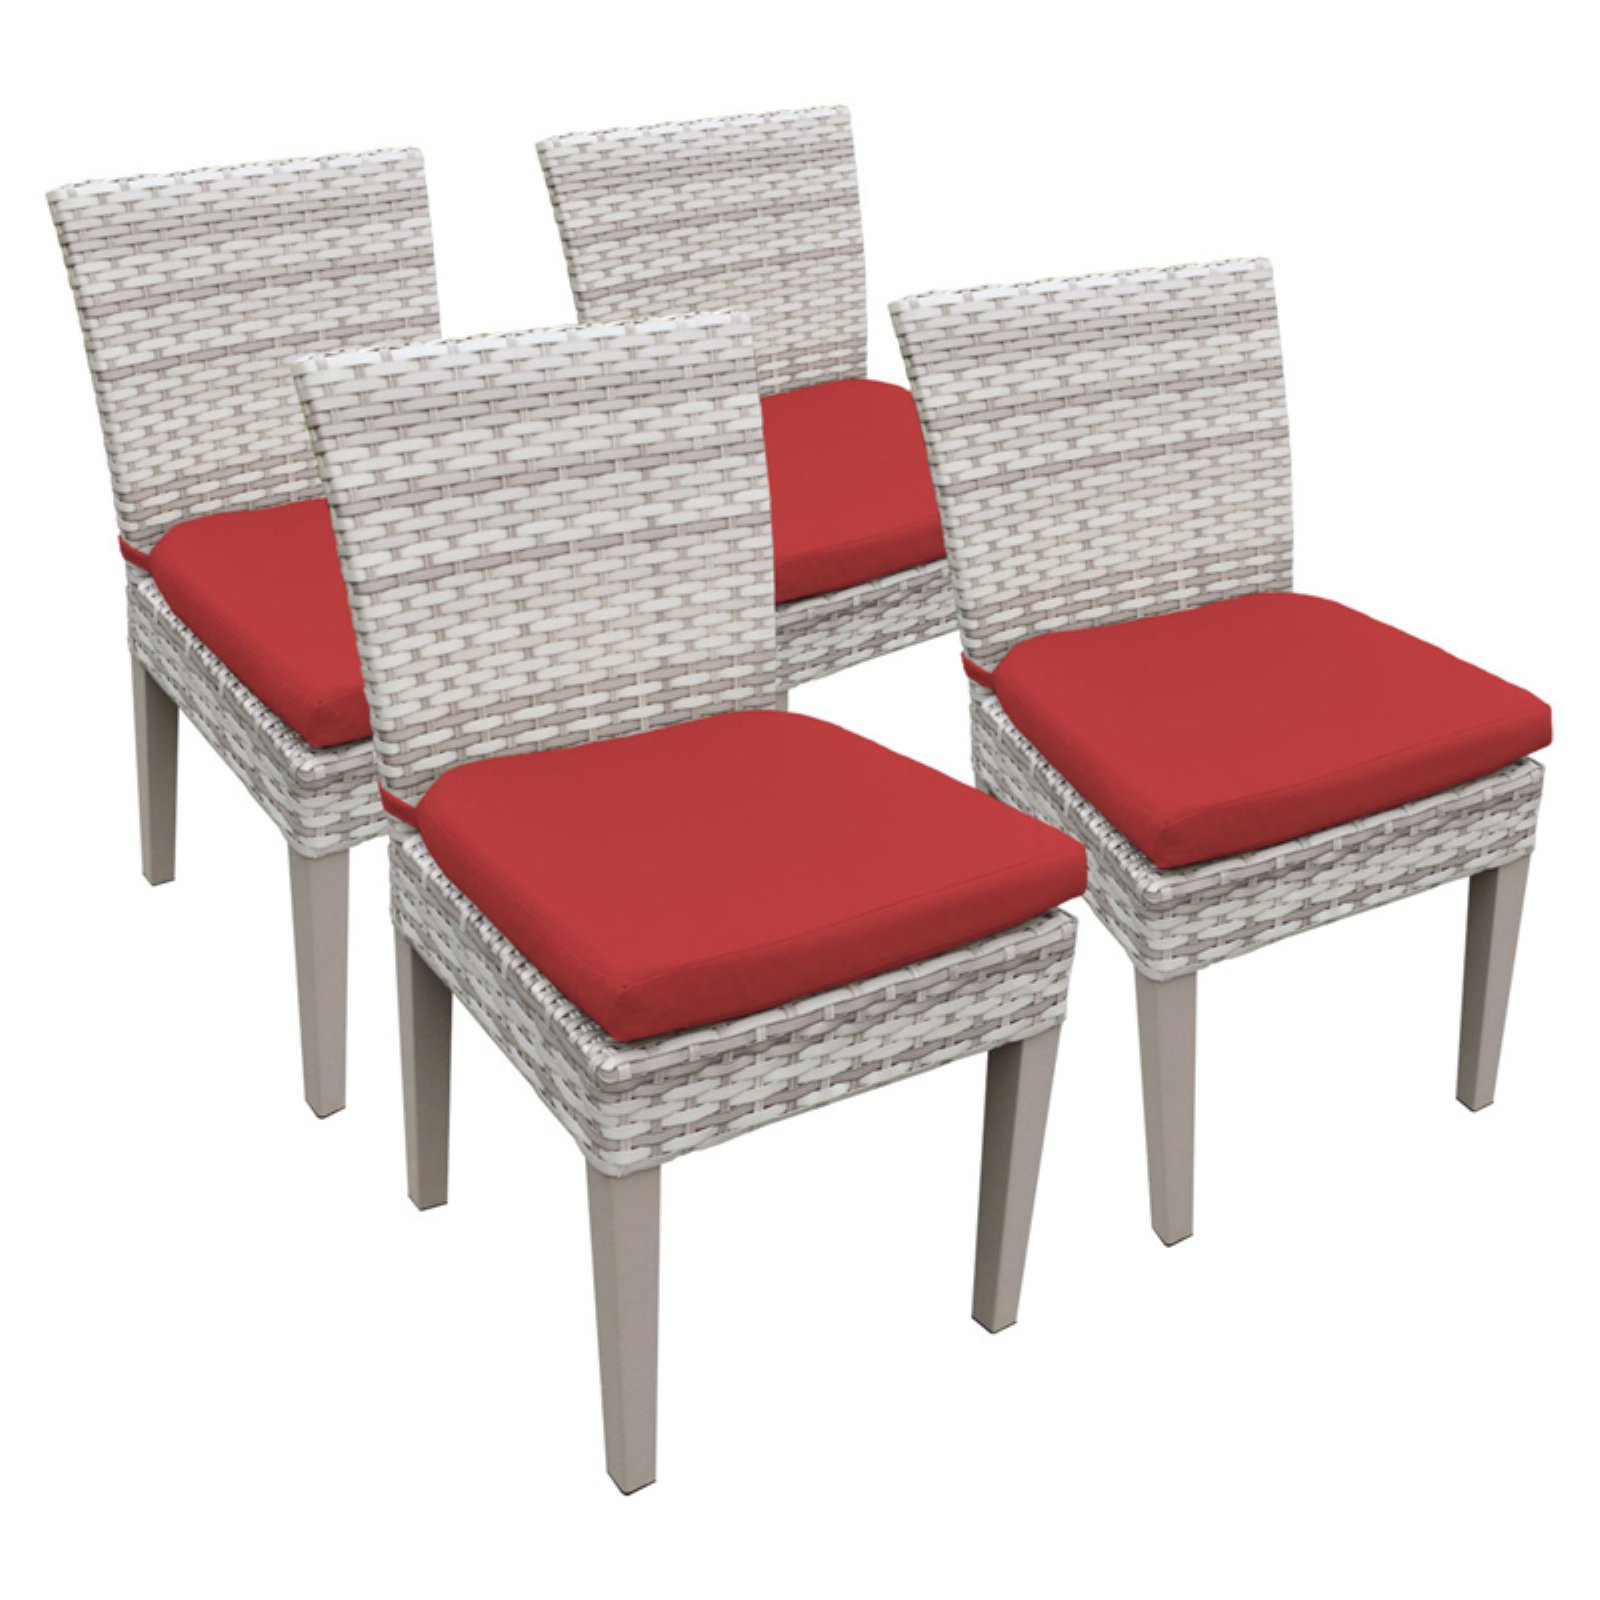 4 Fairmont Armless Dining Chairs-Color:Tangerine - image 2 of 2